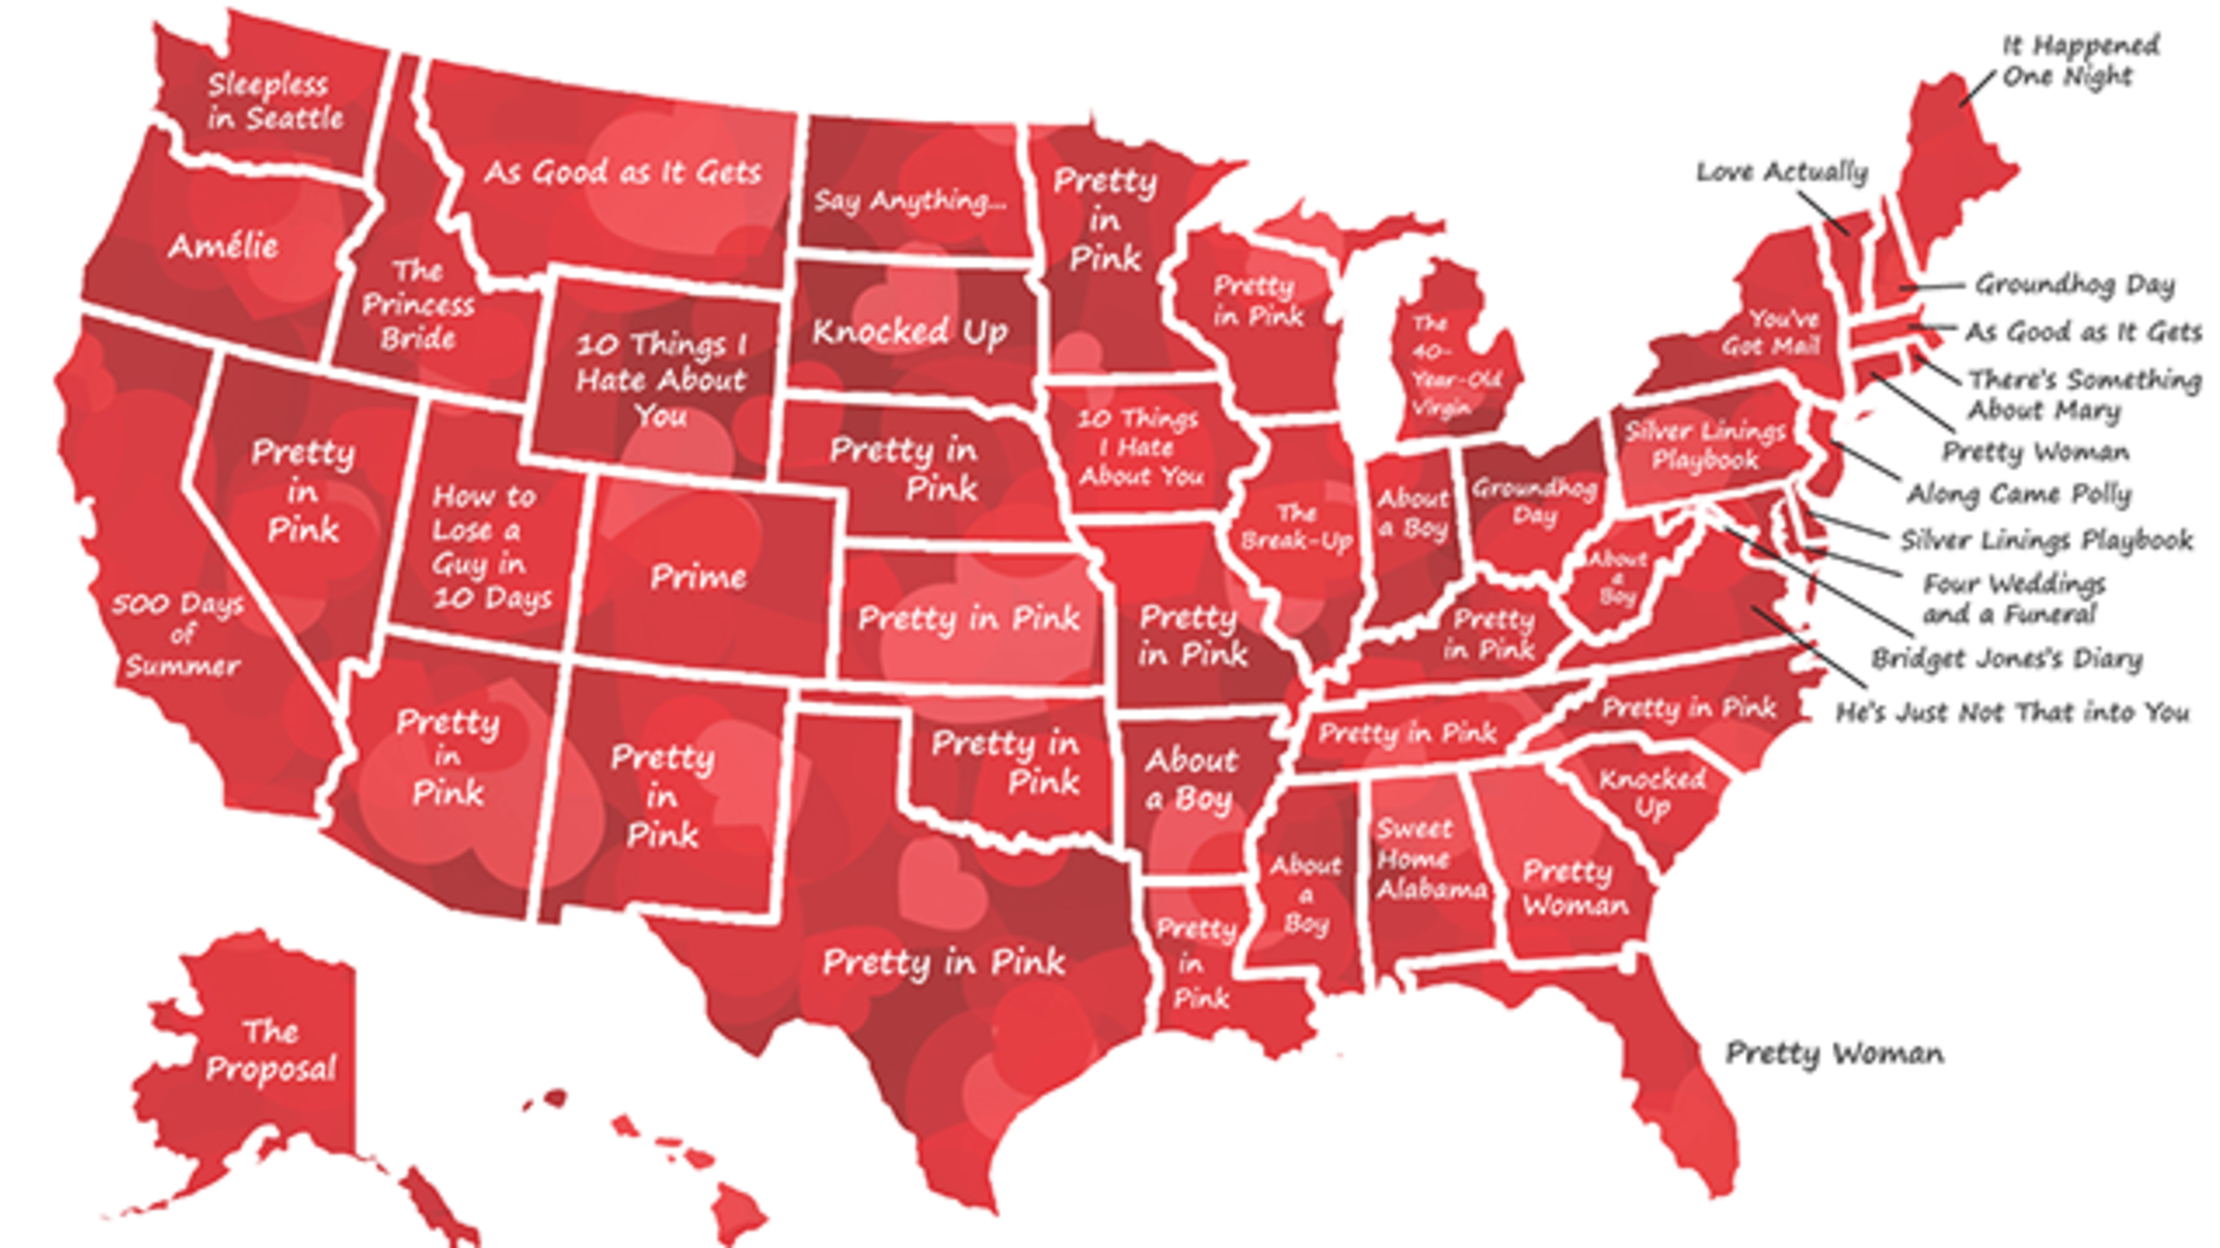 The Most Popular in Each State Mental Floss